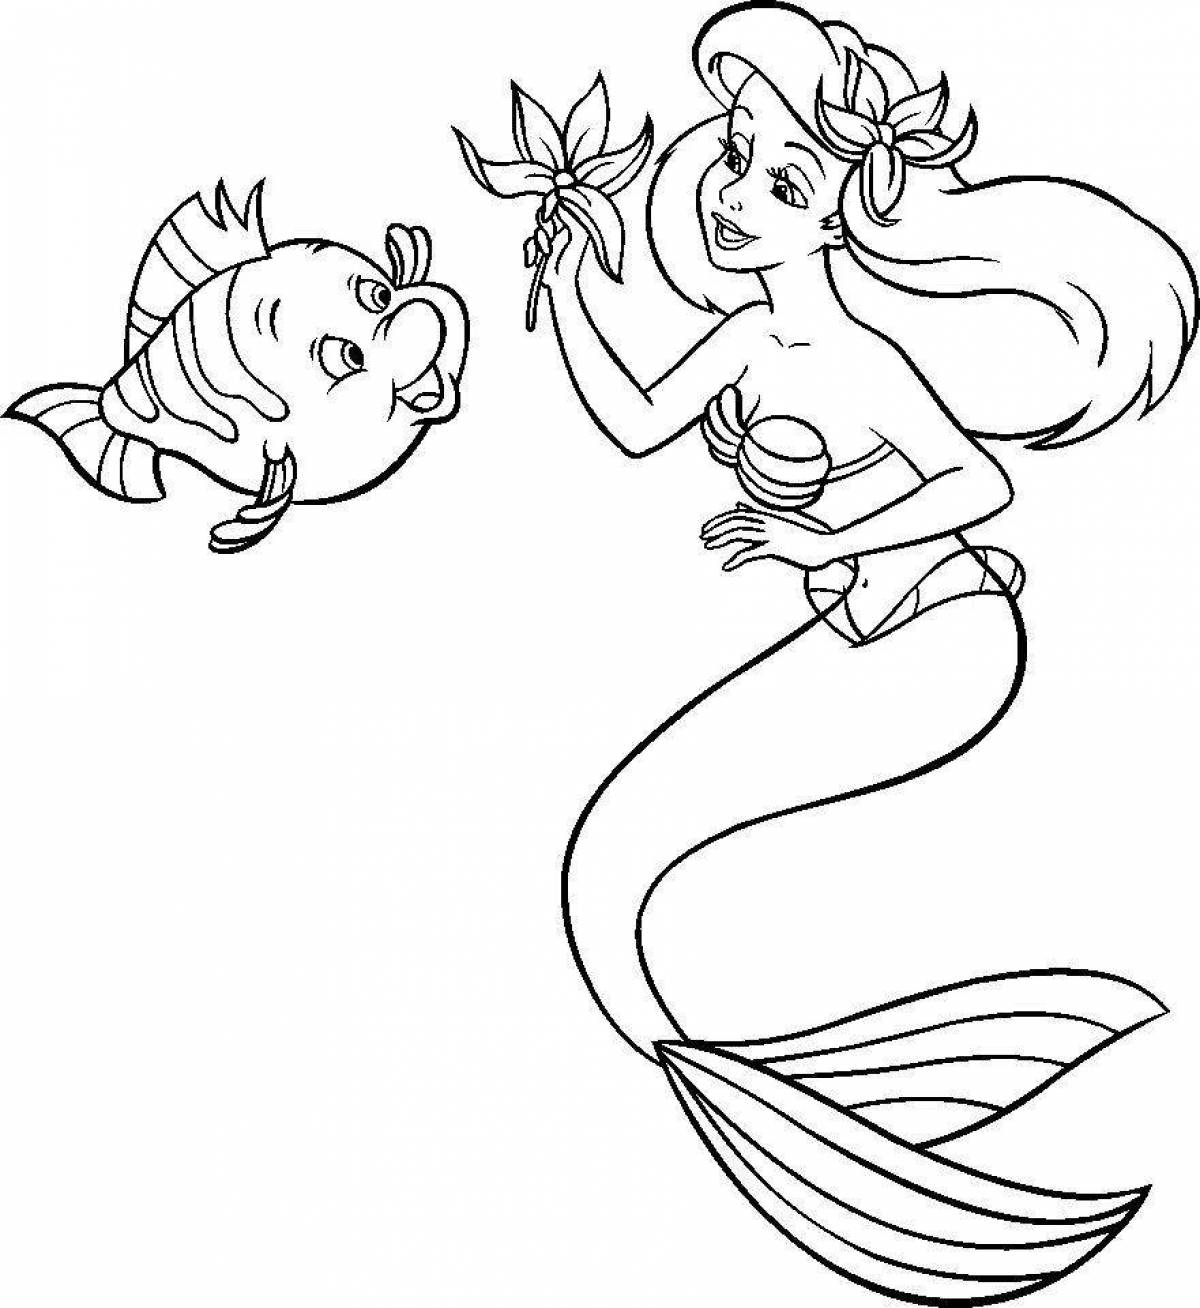 Radiant coloring ariel the little mermaid for kids